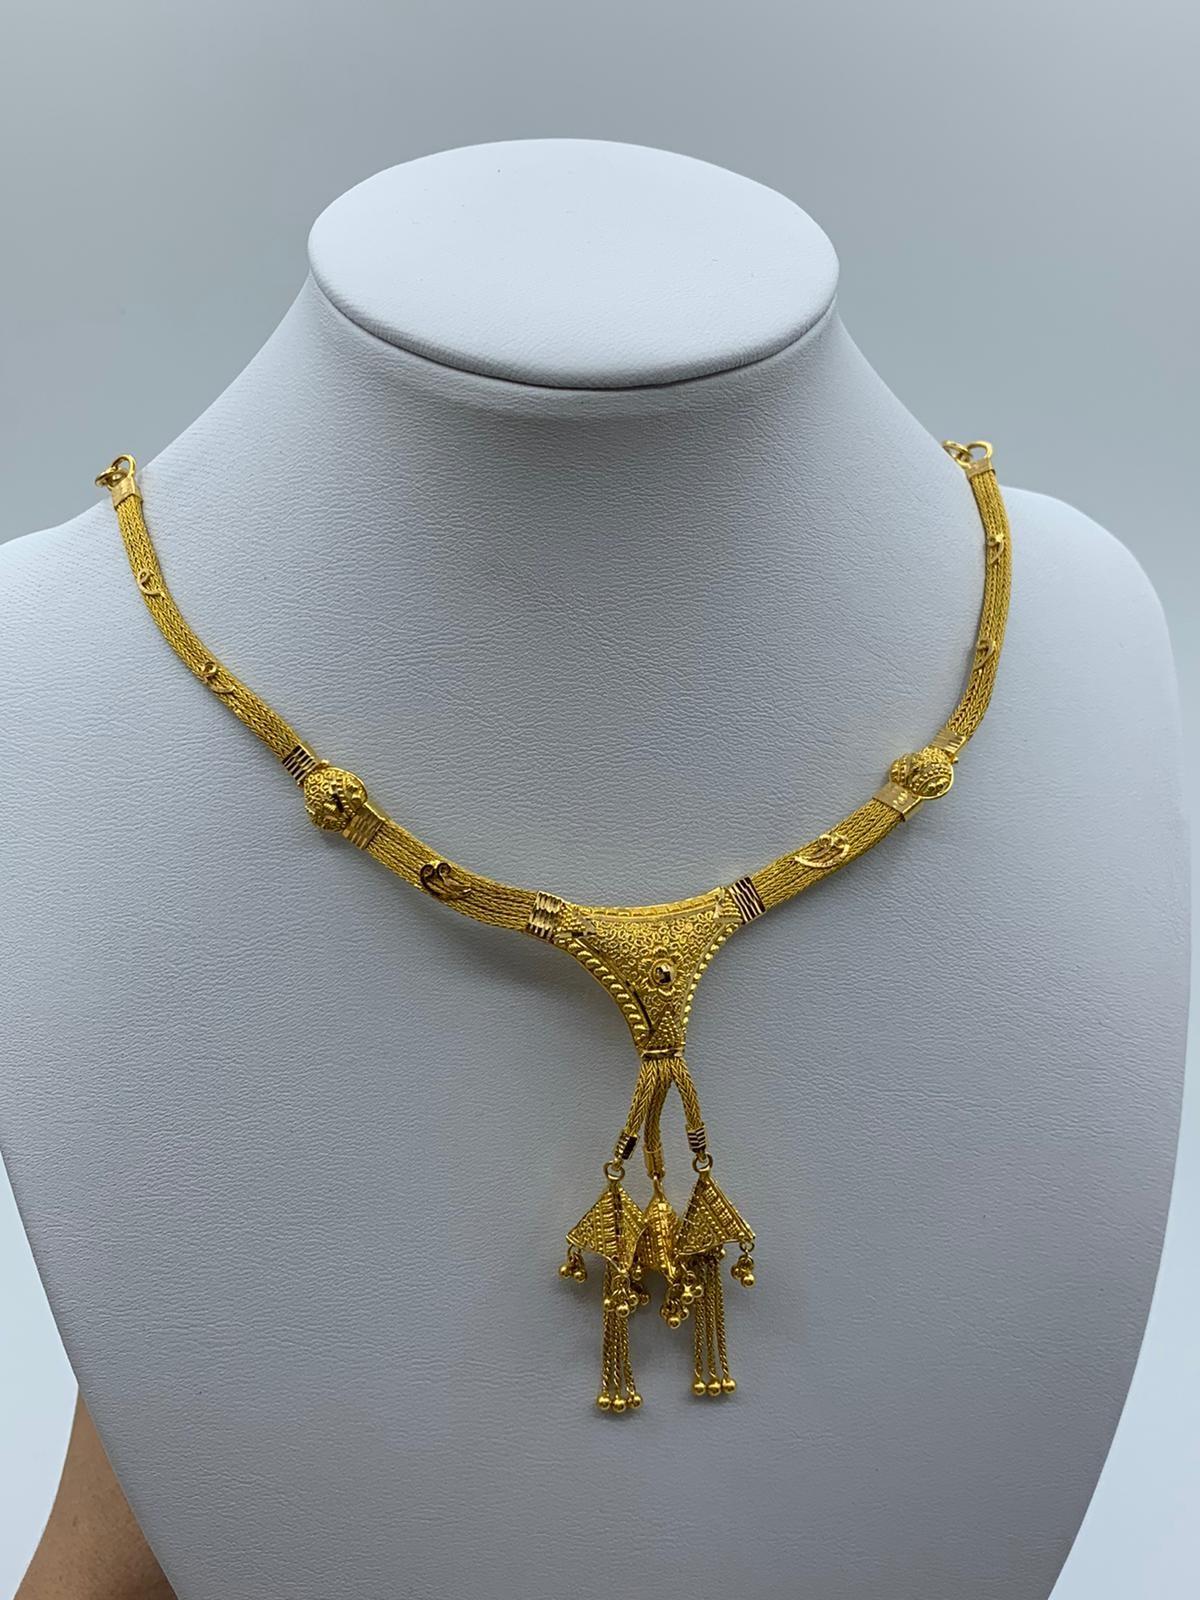 22ct yellow gold necklace, weight 26.6g and 36cm long approx (3-1951 ref) - Image 4 of 6